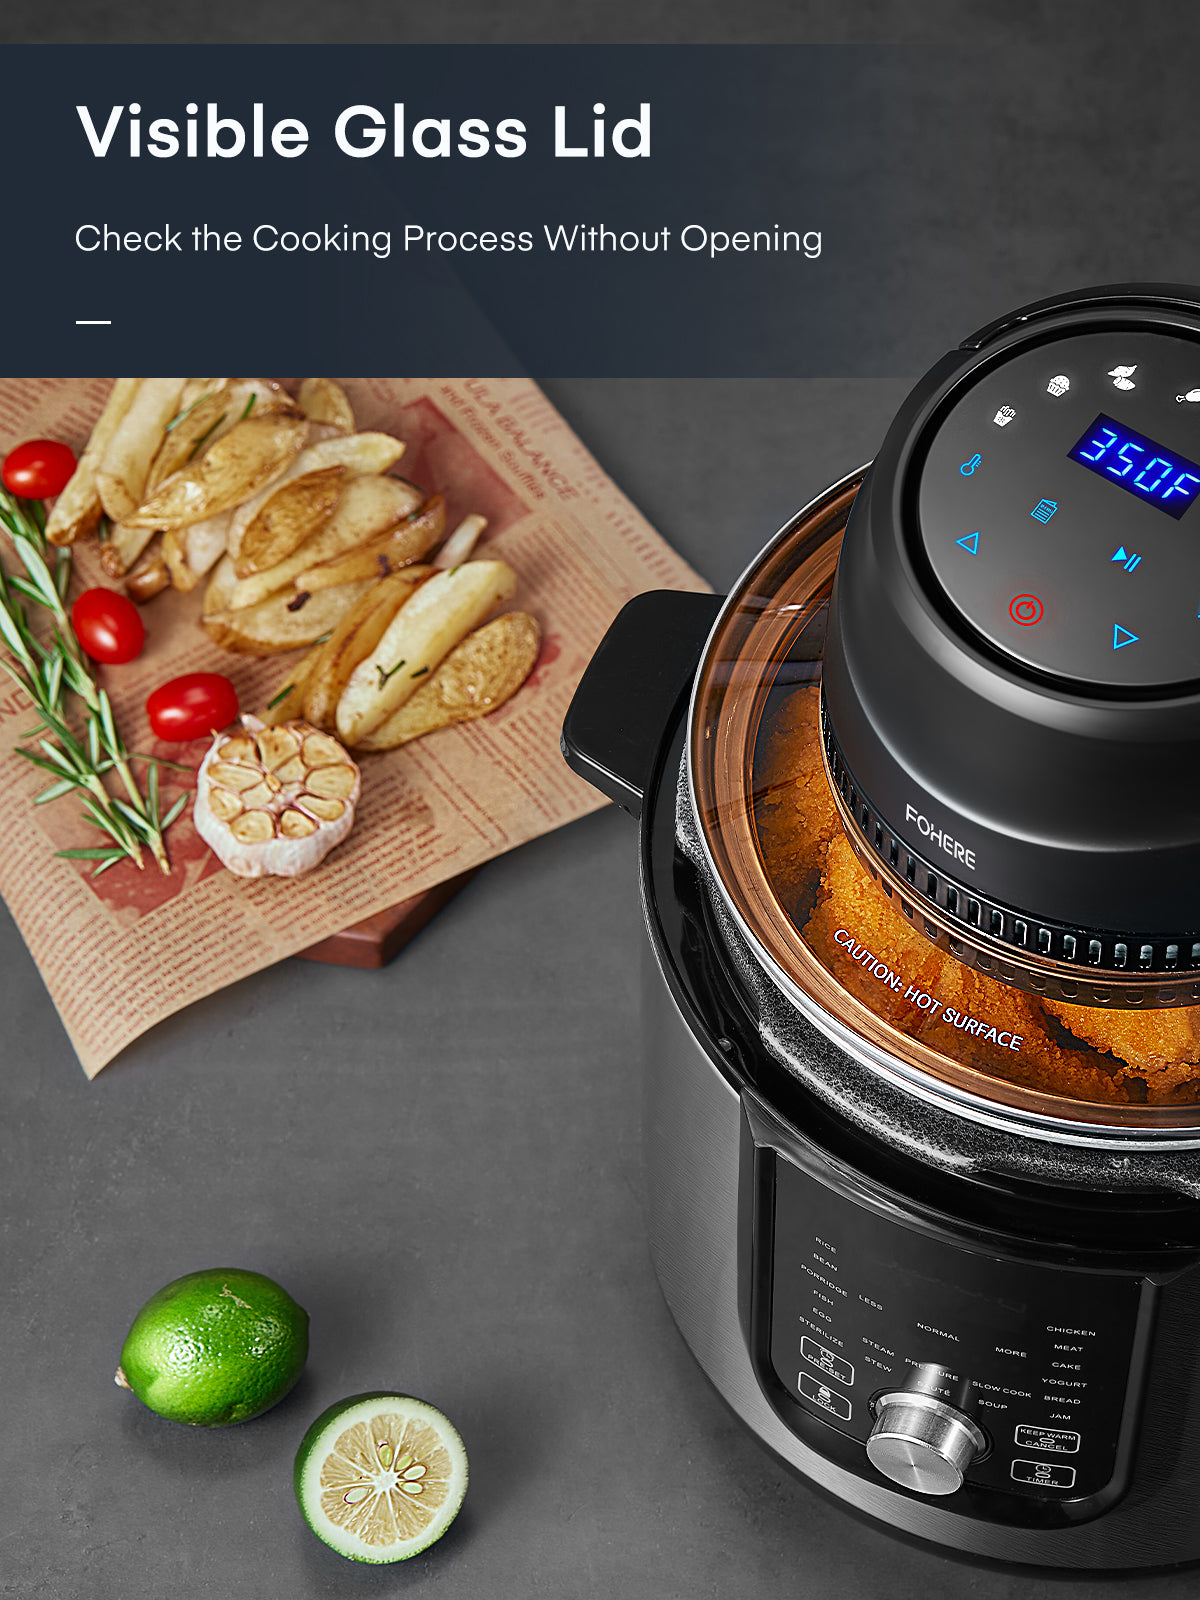 Air Fryer Lid for Instant Pot Pressure Cooker Attachment 1400W Digital  Touch